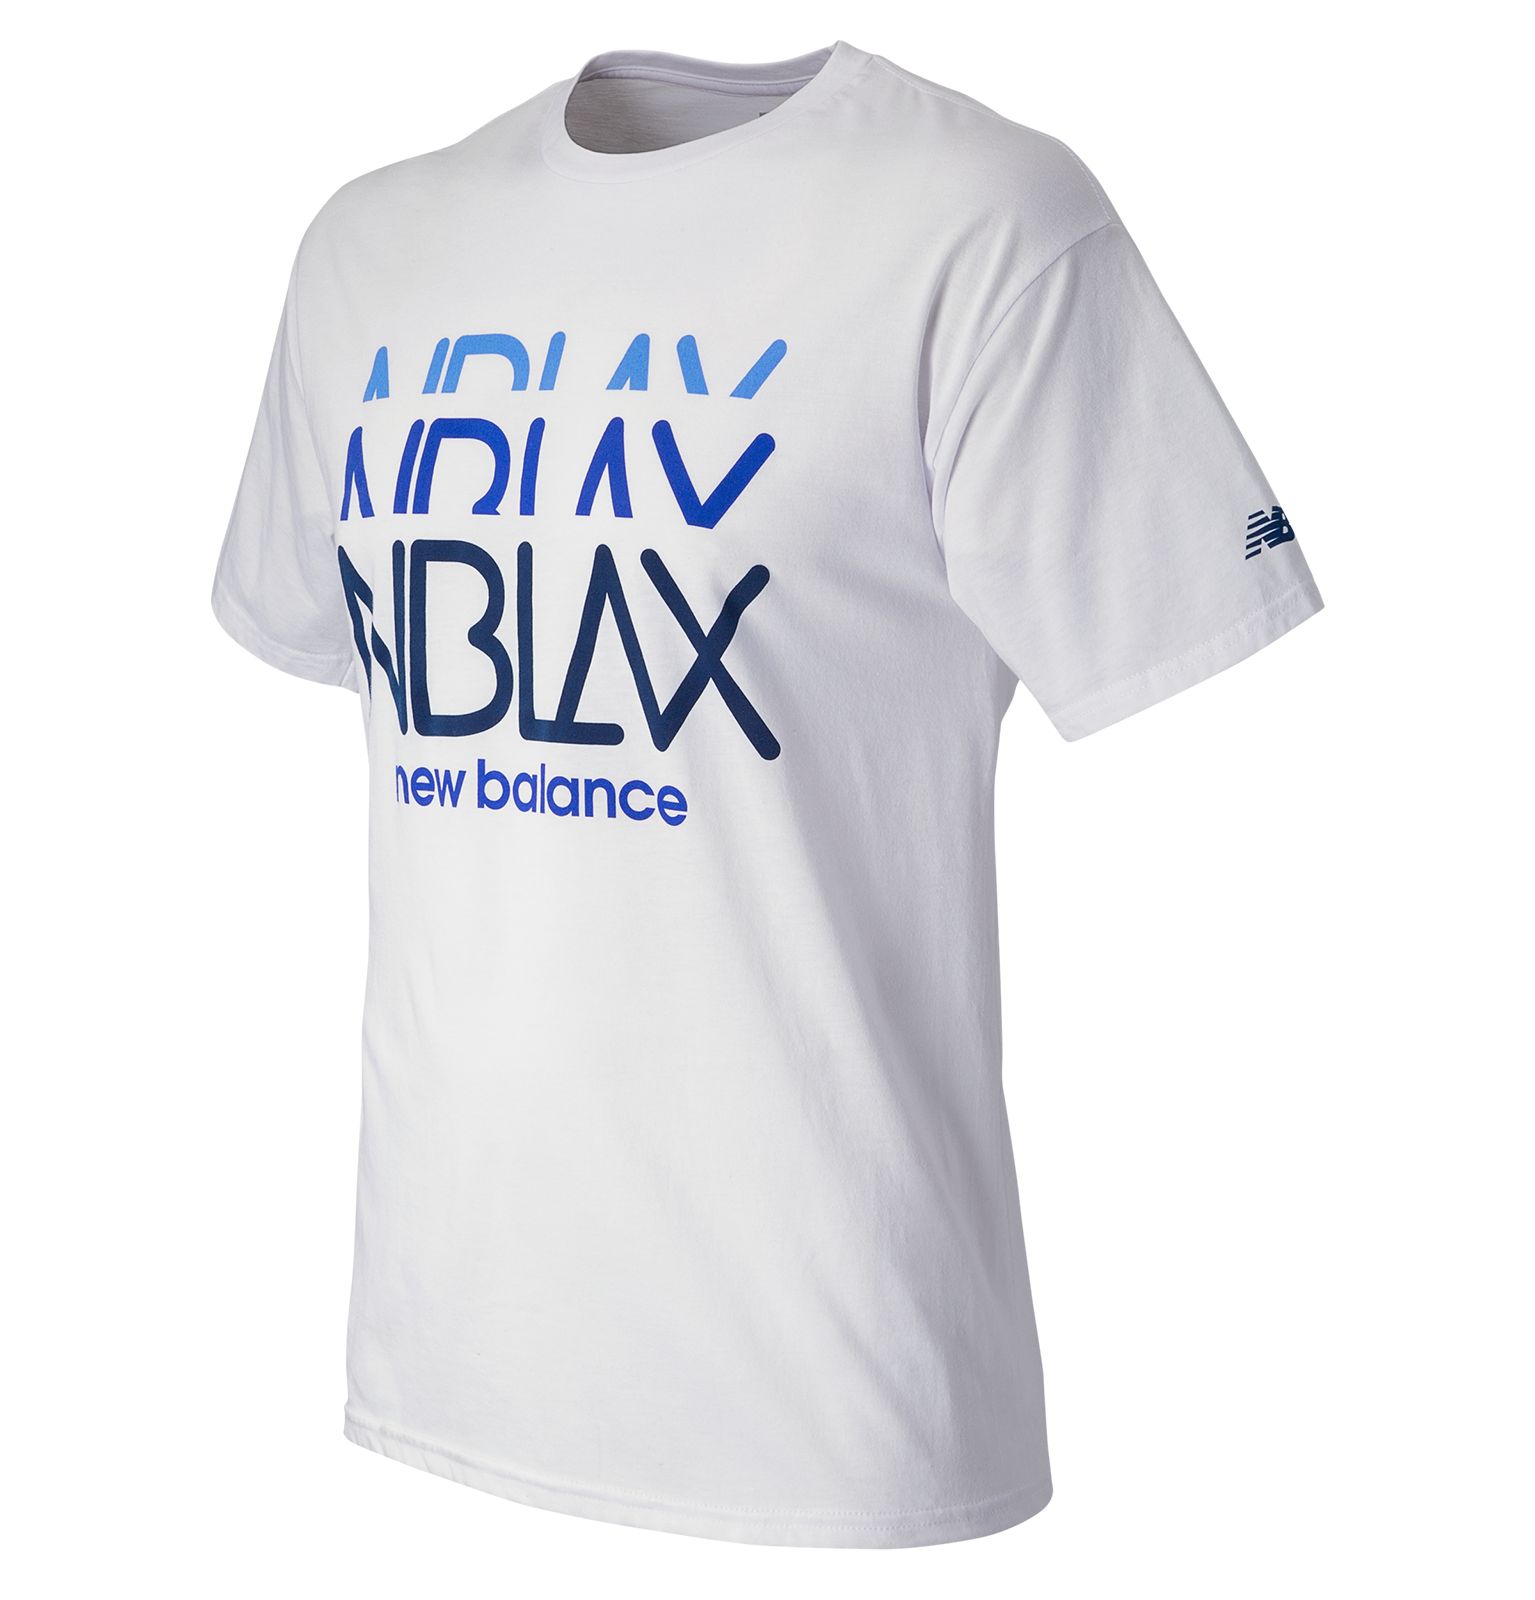 NB LAX Faded Tee, White image number 0